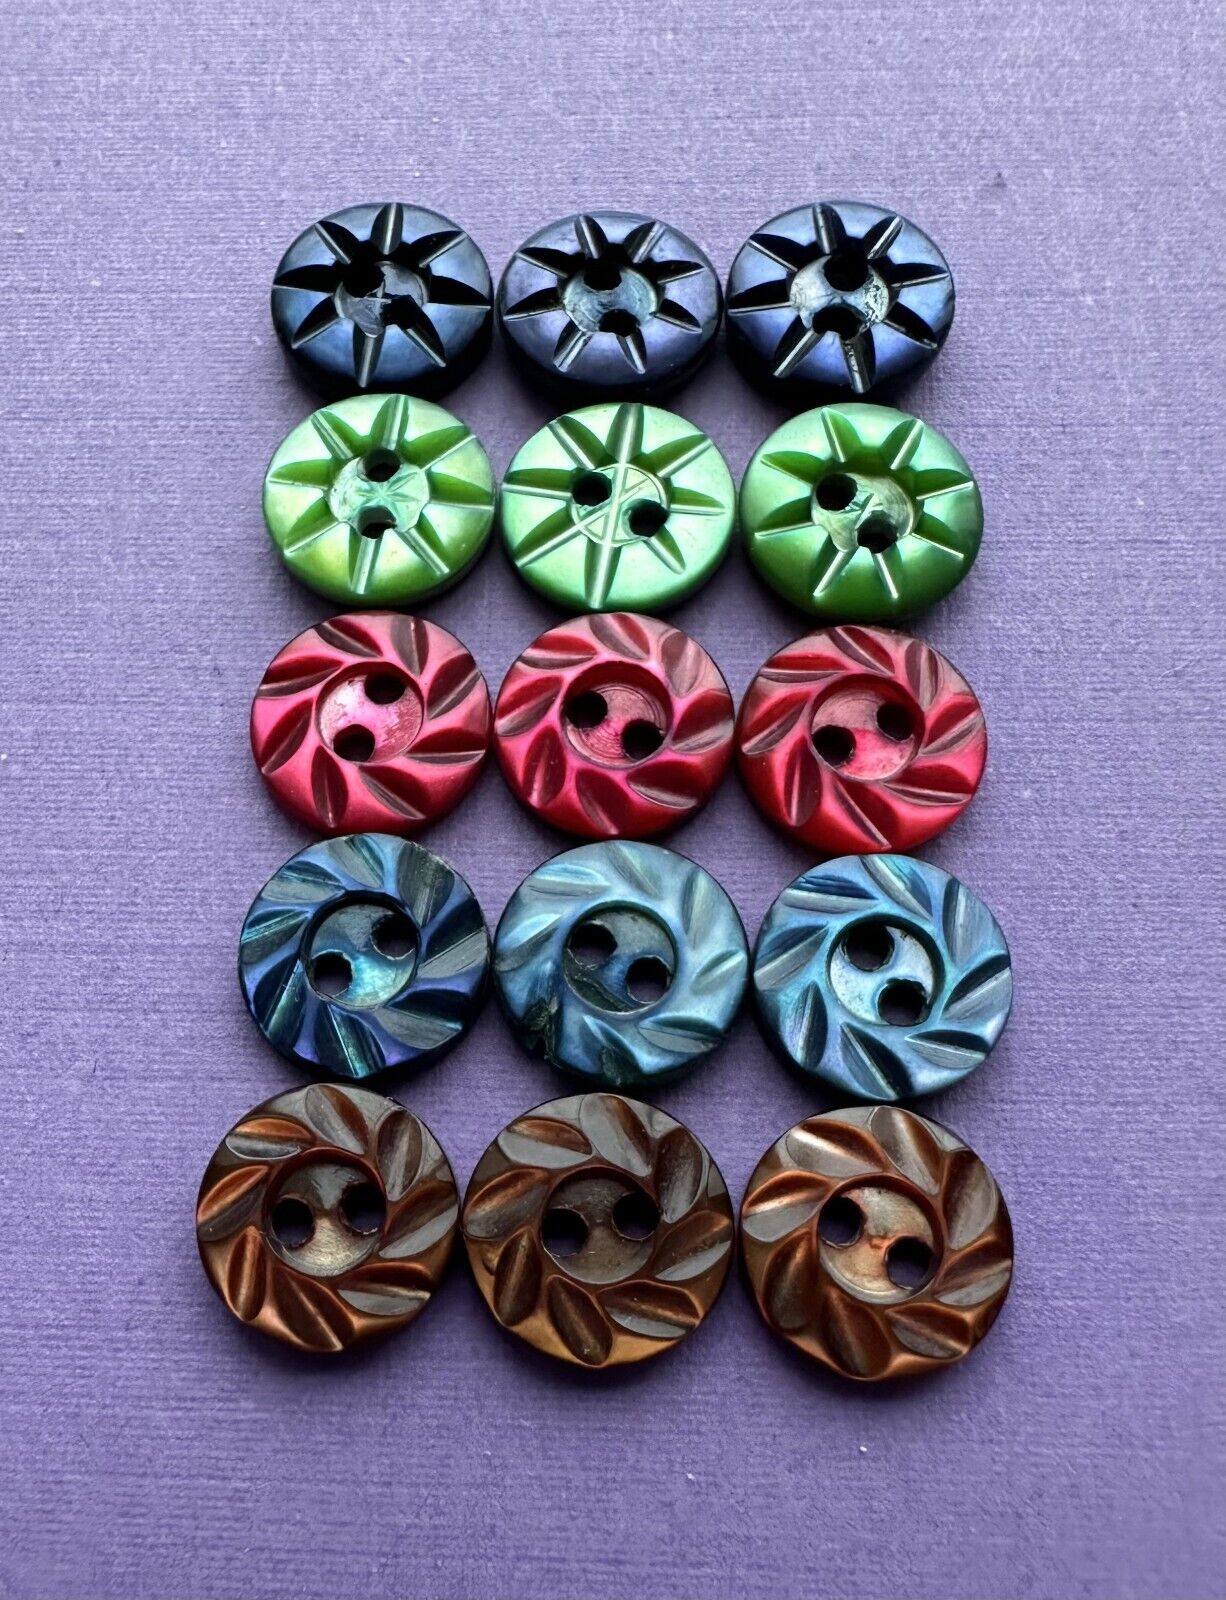 15 Vintage Small Dyed Carved Mother of Pearl Buttons - 5 Gorgeous Colors